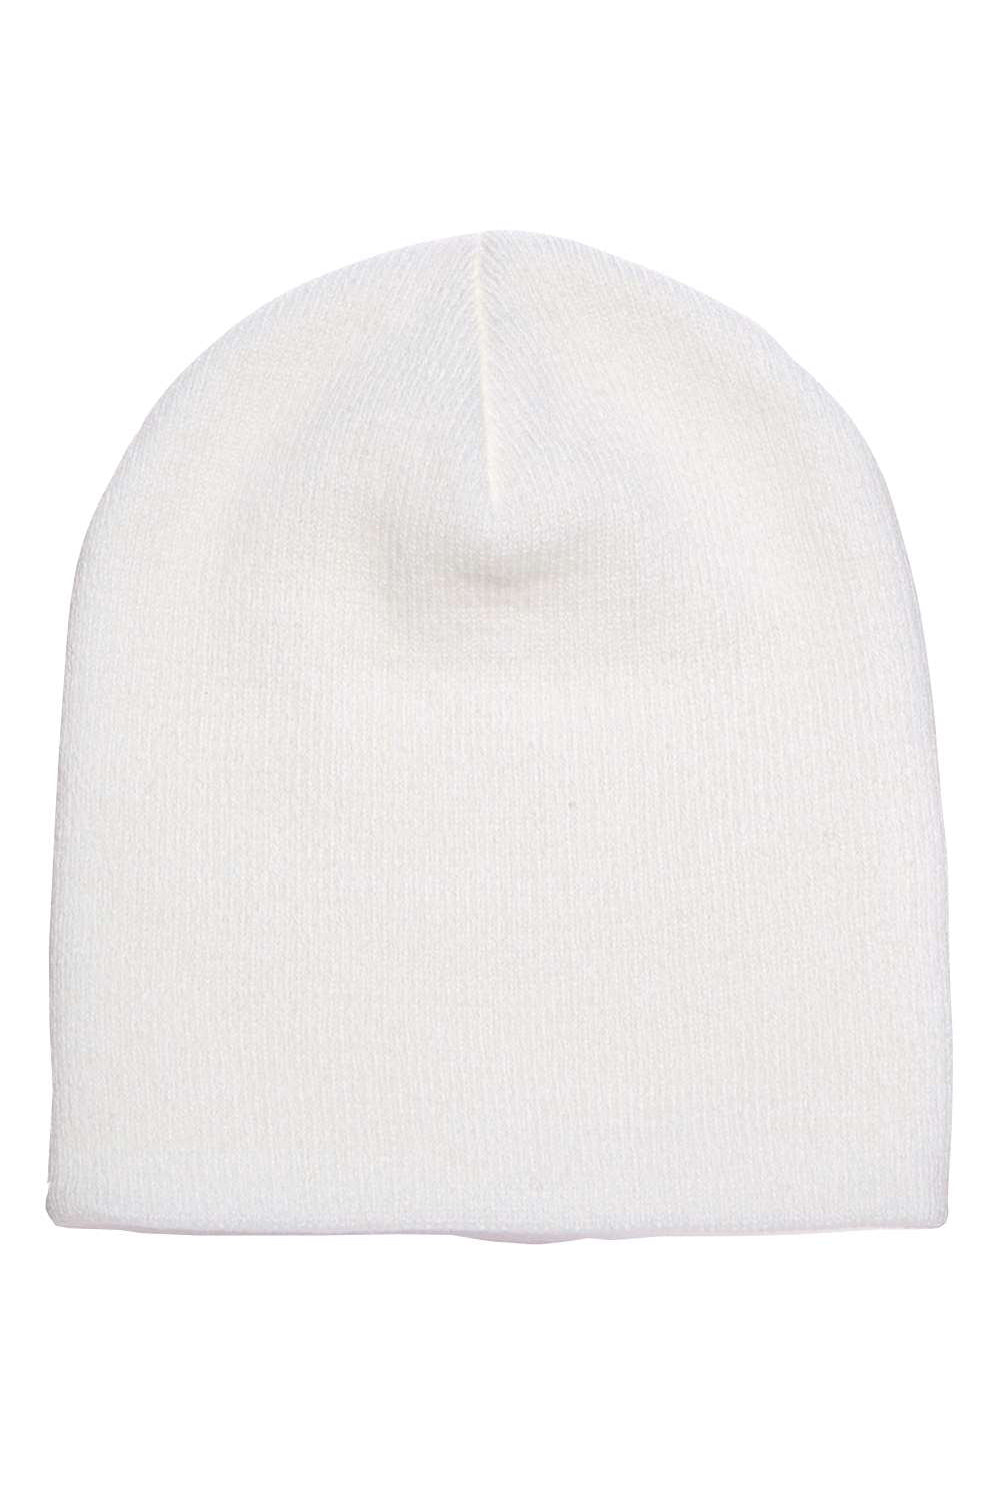 Yupoong 1500KC Mens Beanie White Flat Front